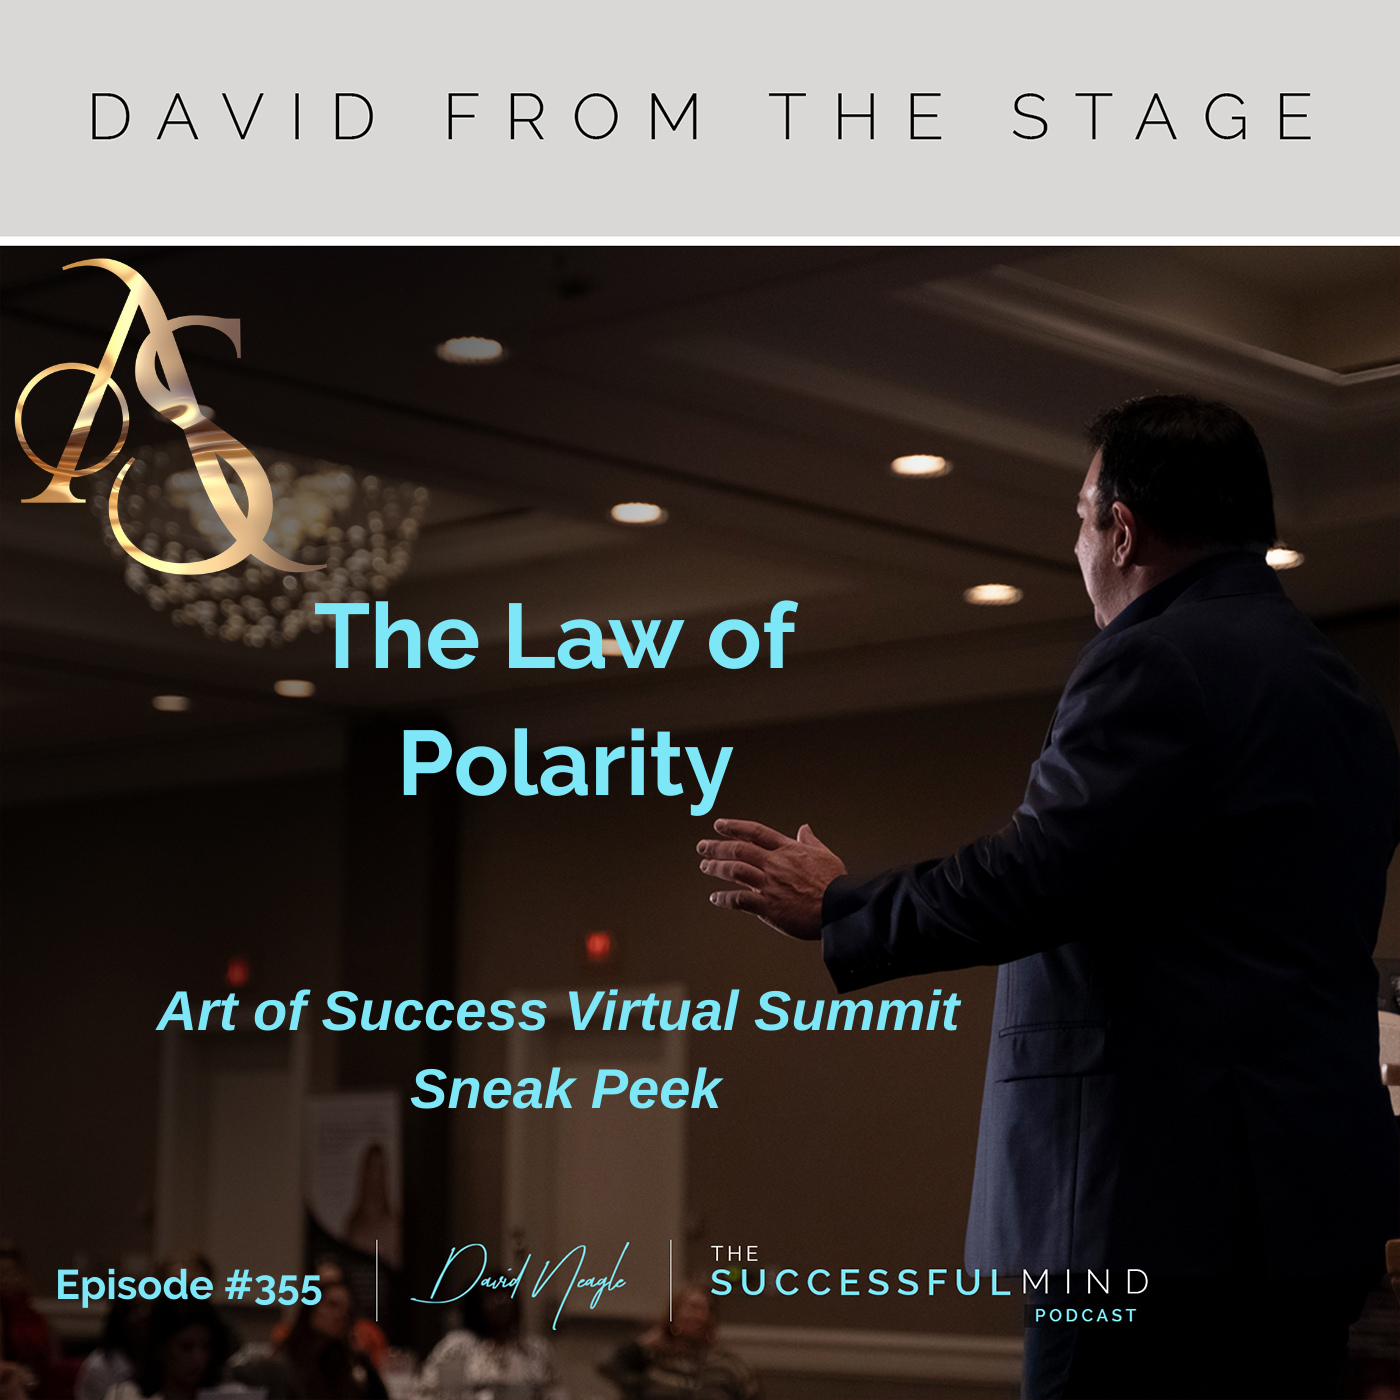 The Successful Mind Podcast - Episode 355 - AOSS Sneak Peek: The Law of Polarity